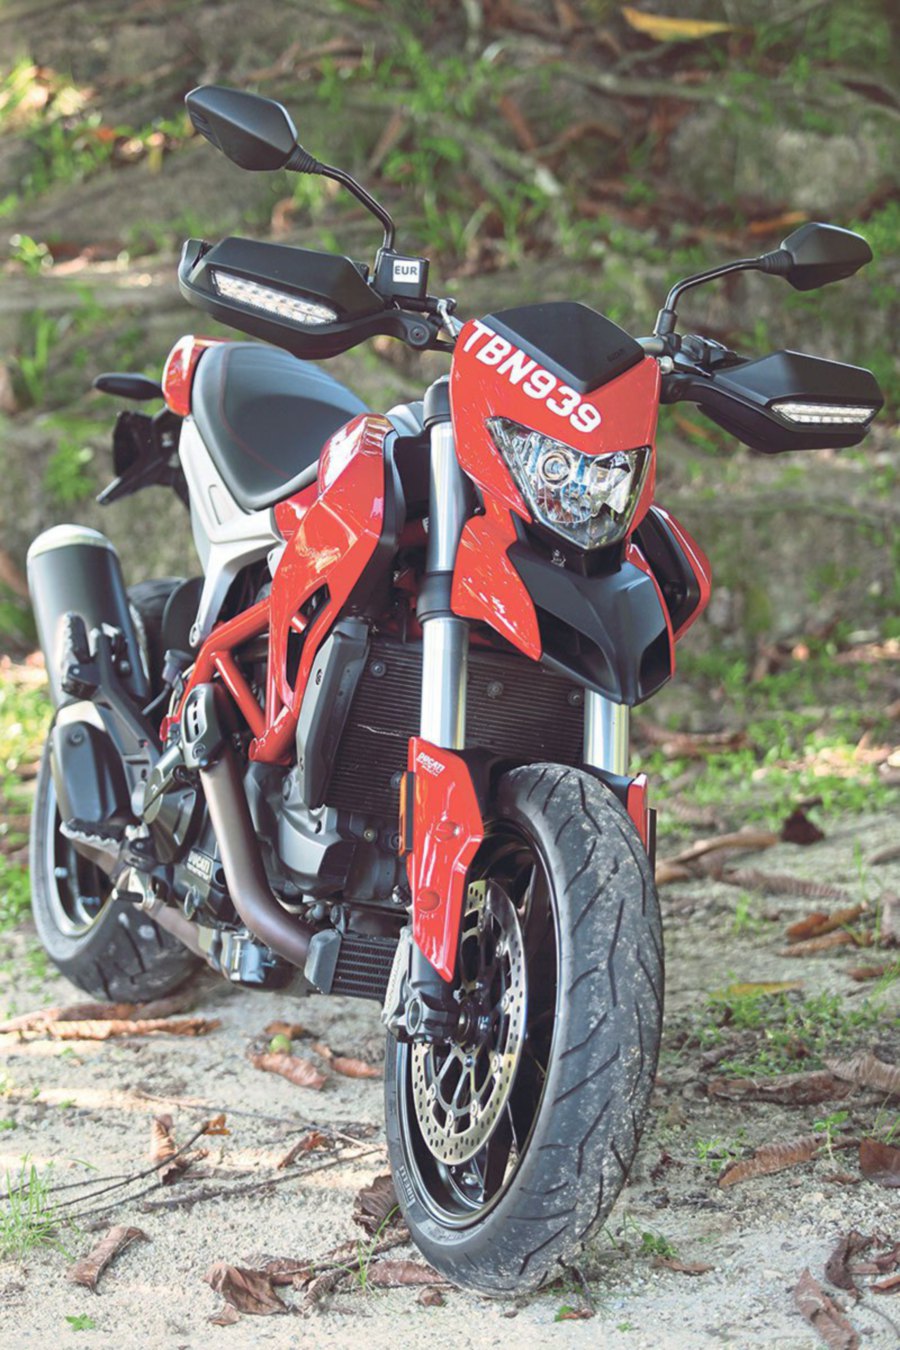 Lightweight and spartan, the Hypermotard accelerates strongly.